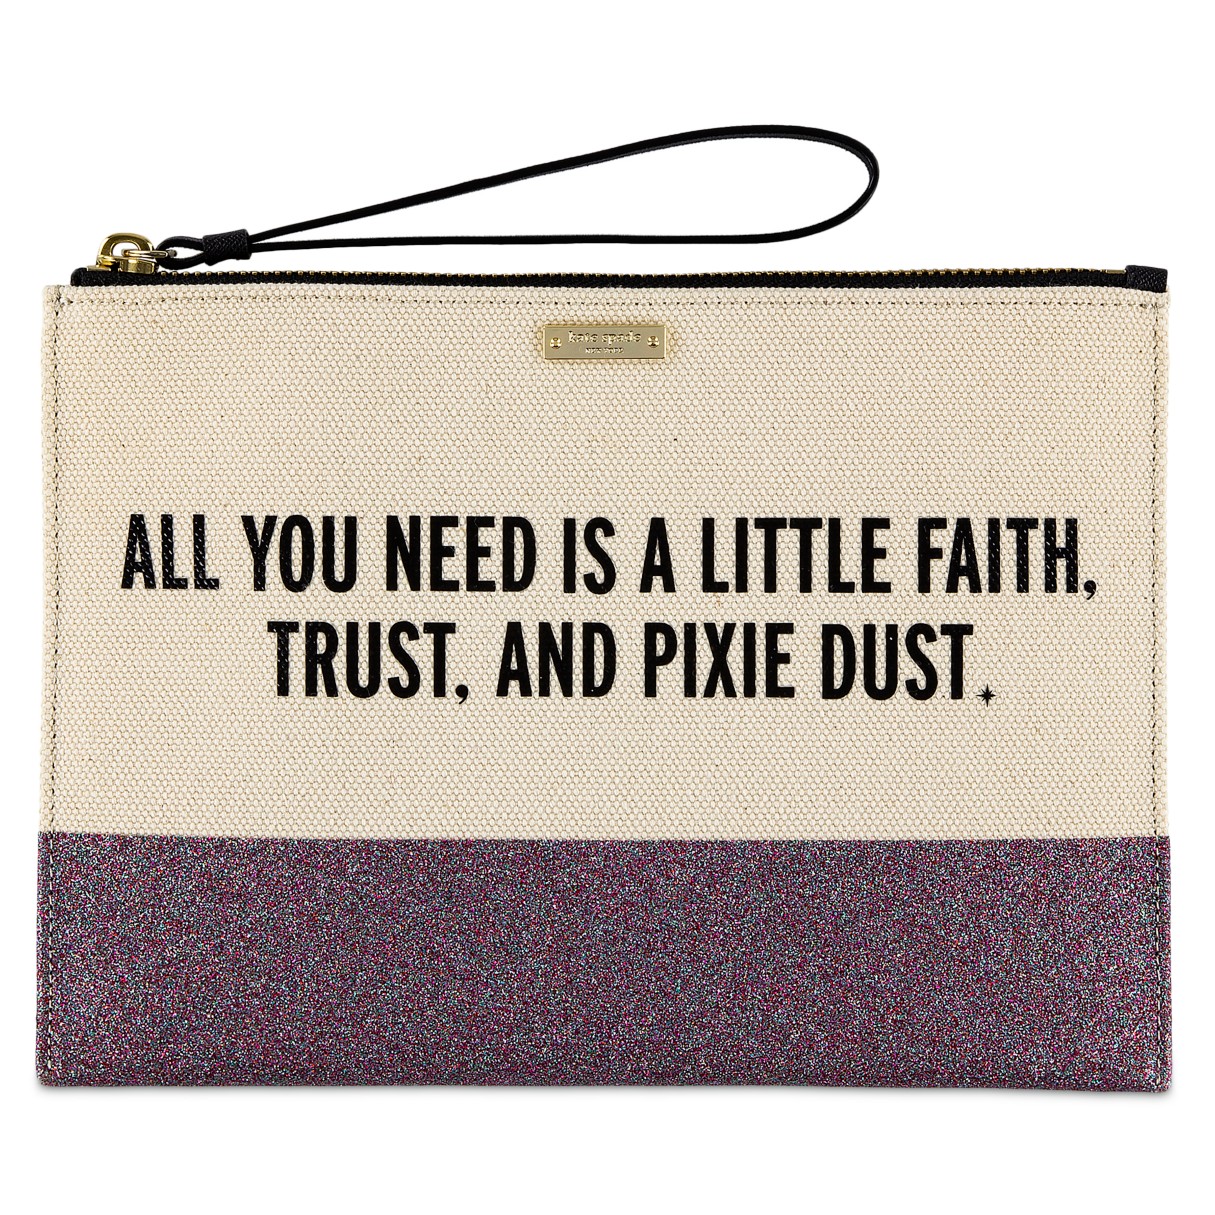 Peter Pan Canvas Glitter Clutch by kate spade new york